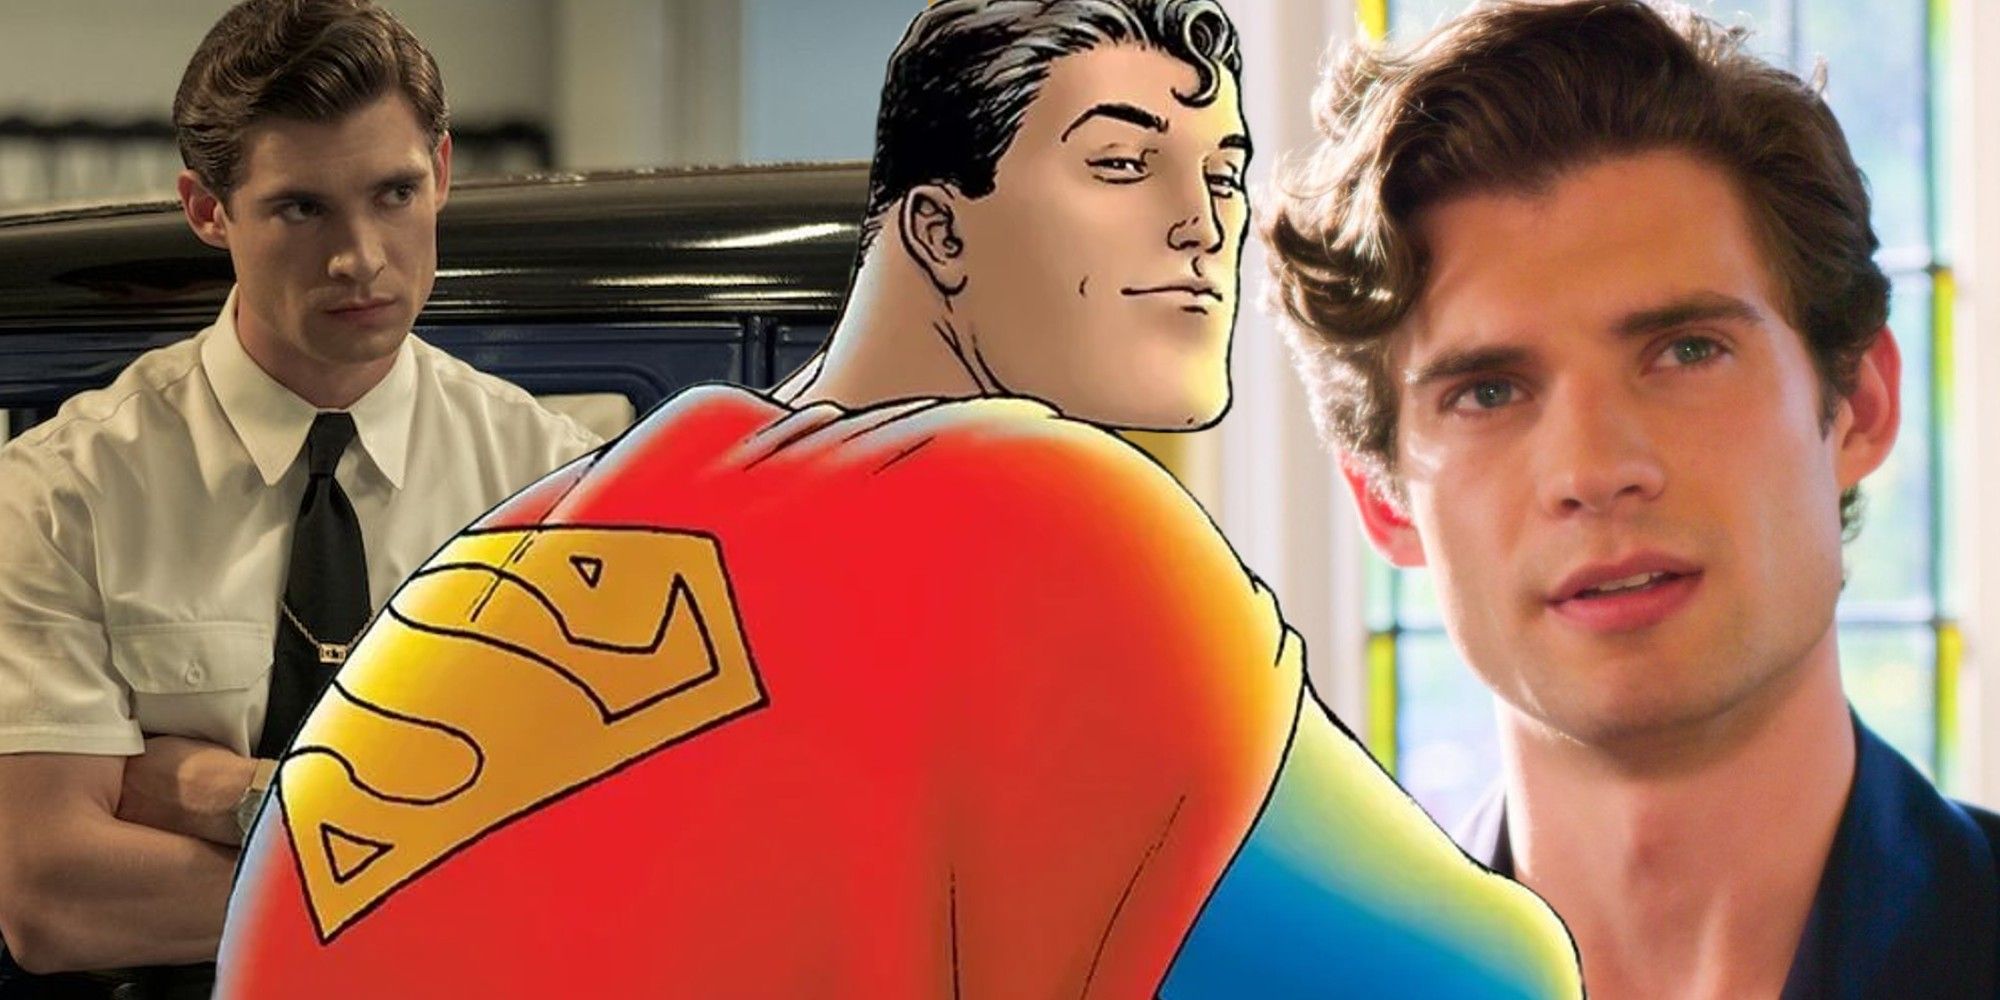 Montage of David Corenswet from Hollywood on the left, Superman from the All-Star Superman comics in the center, and Corenswet in a scene from The Politician on the right.